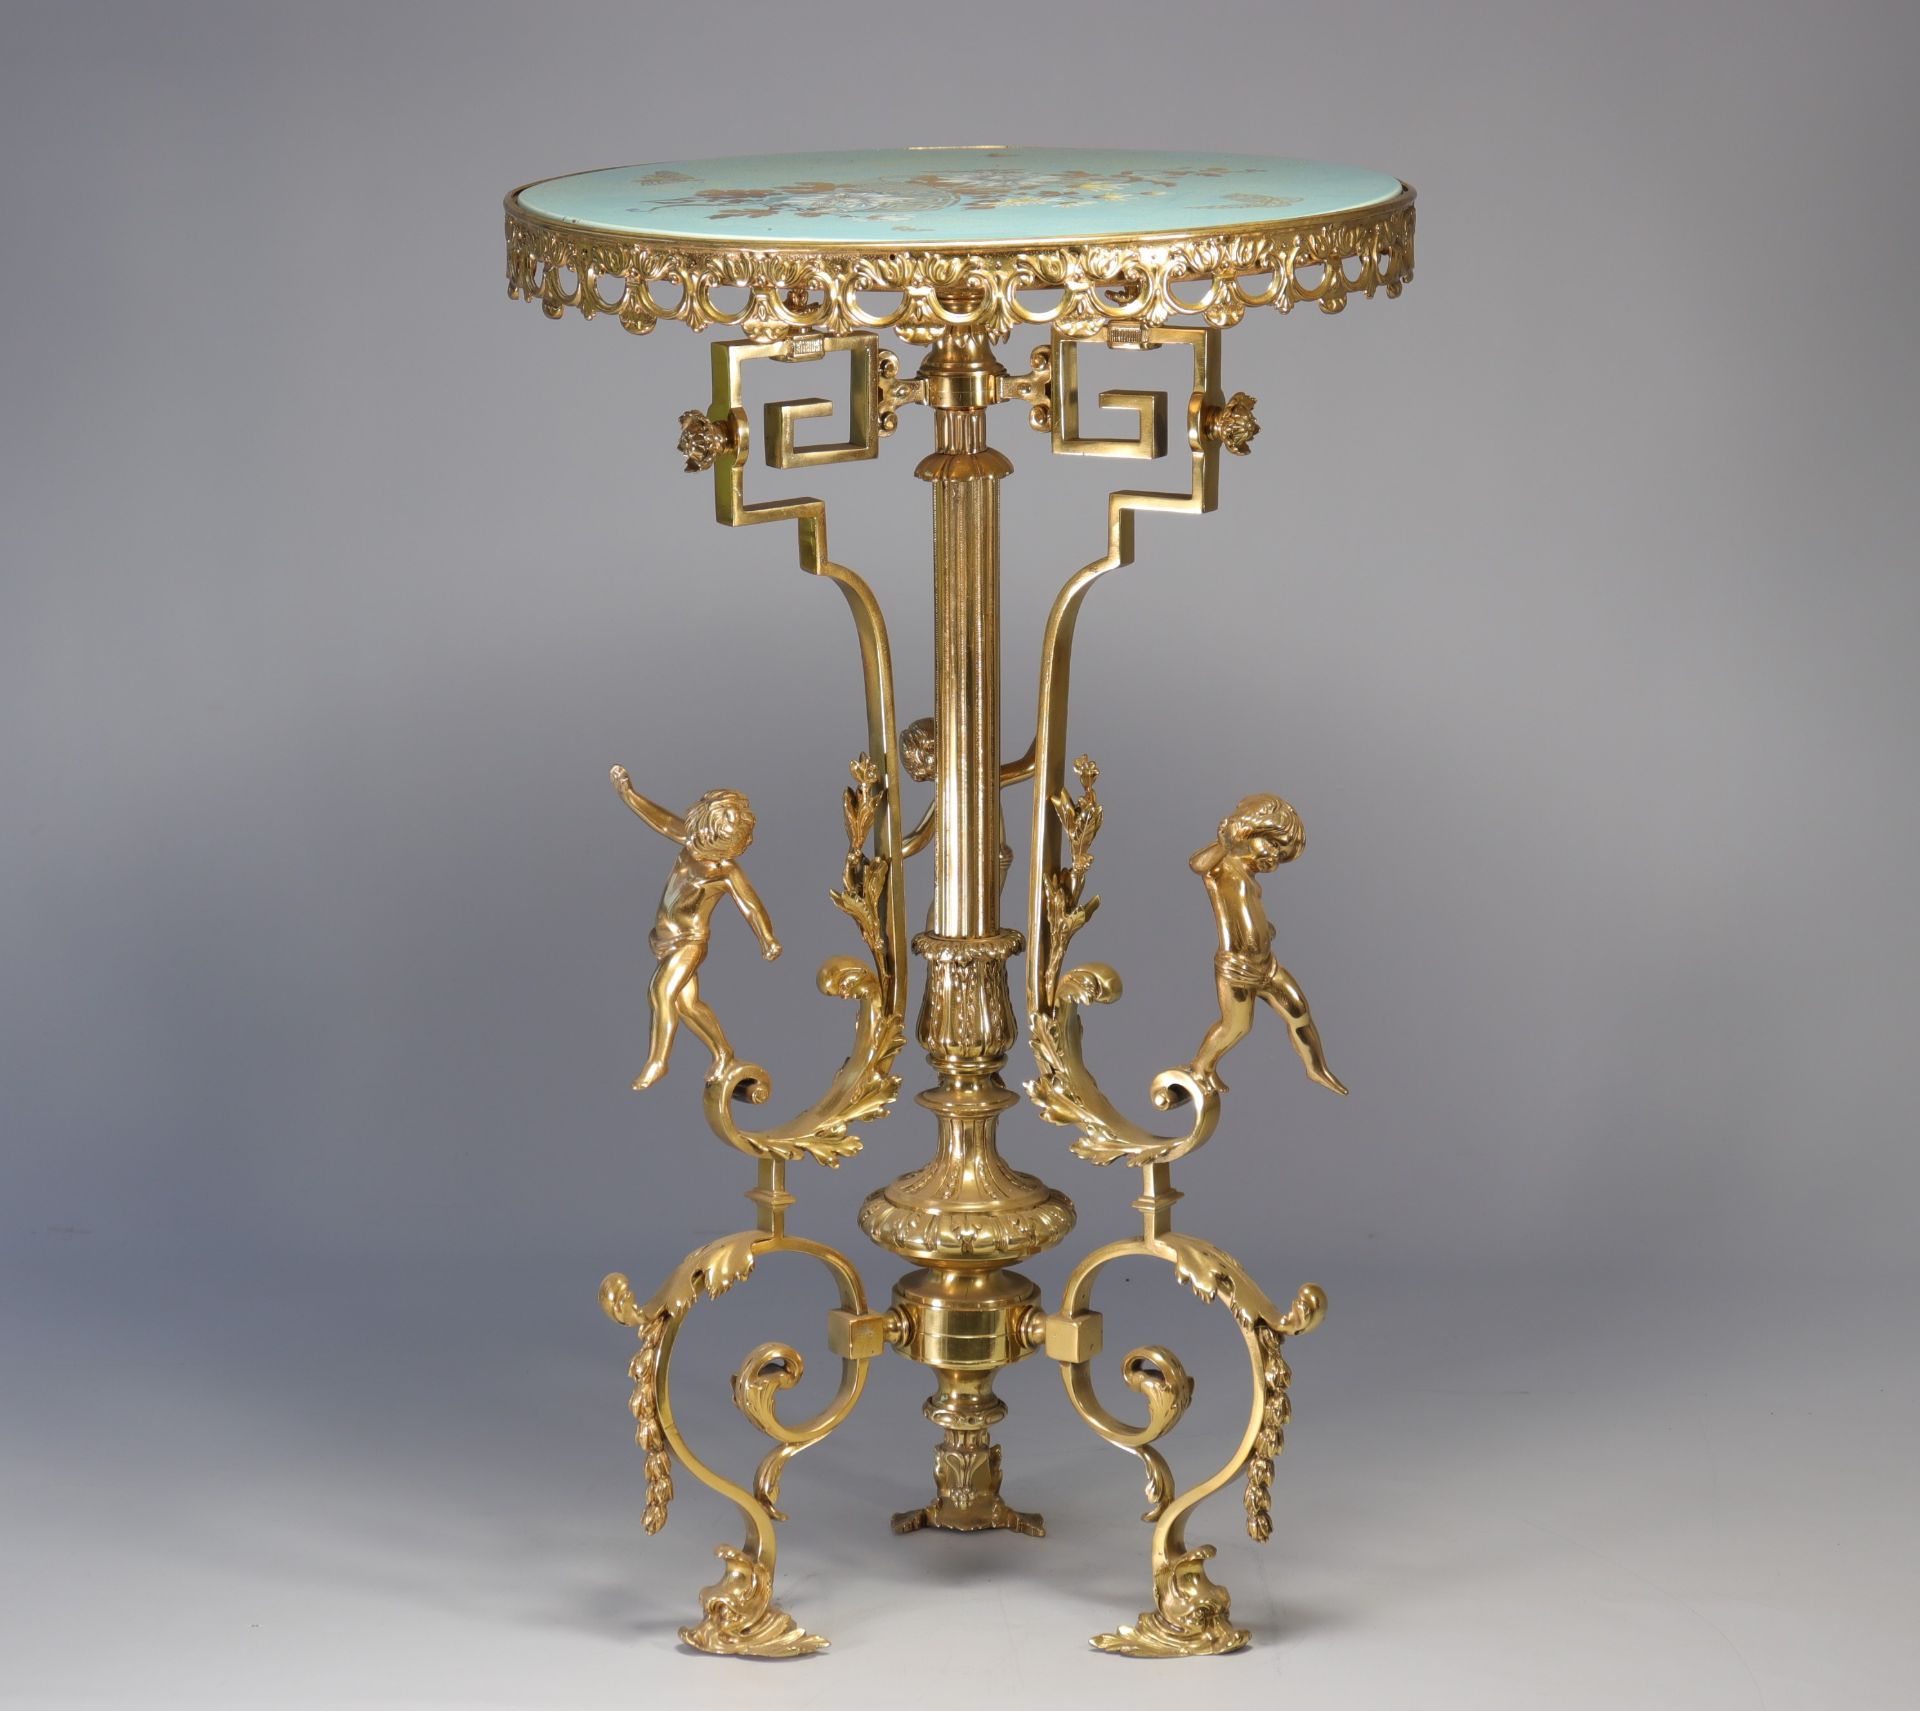 Bronze table with light blue Art Nouveau top decorated with flowers and butterflies - Bild 3 aus 3